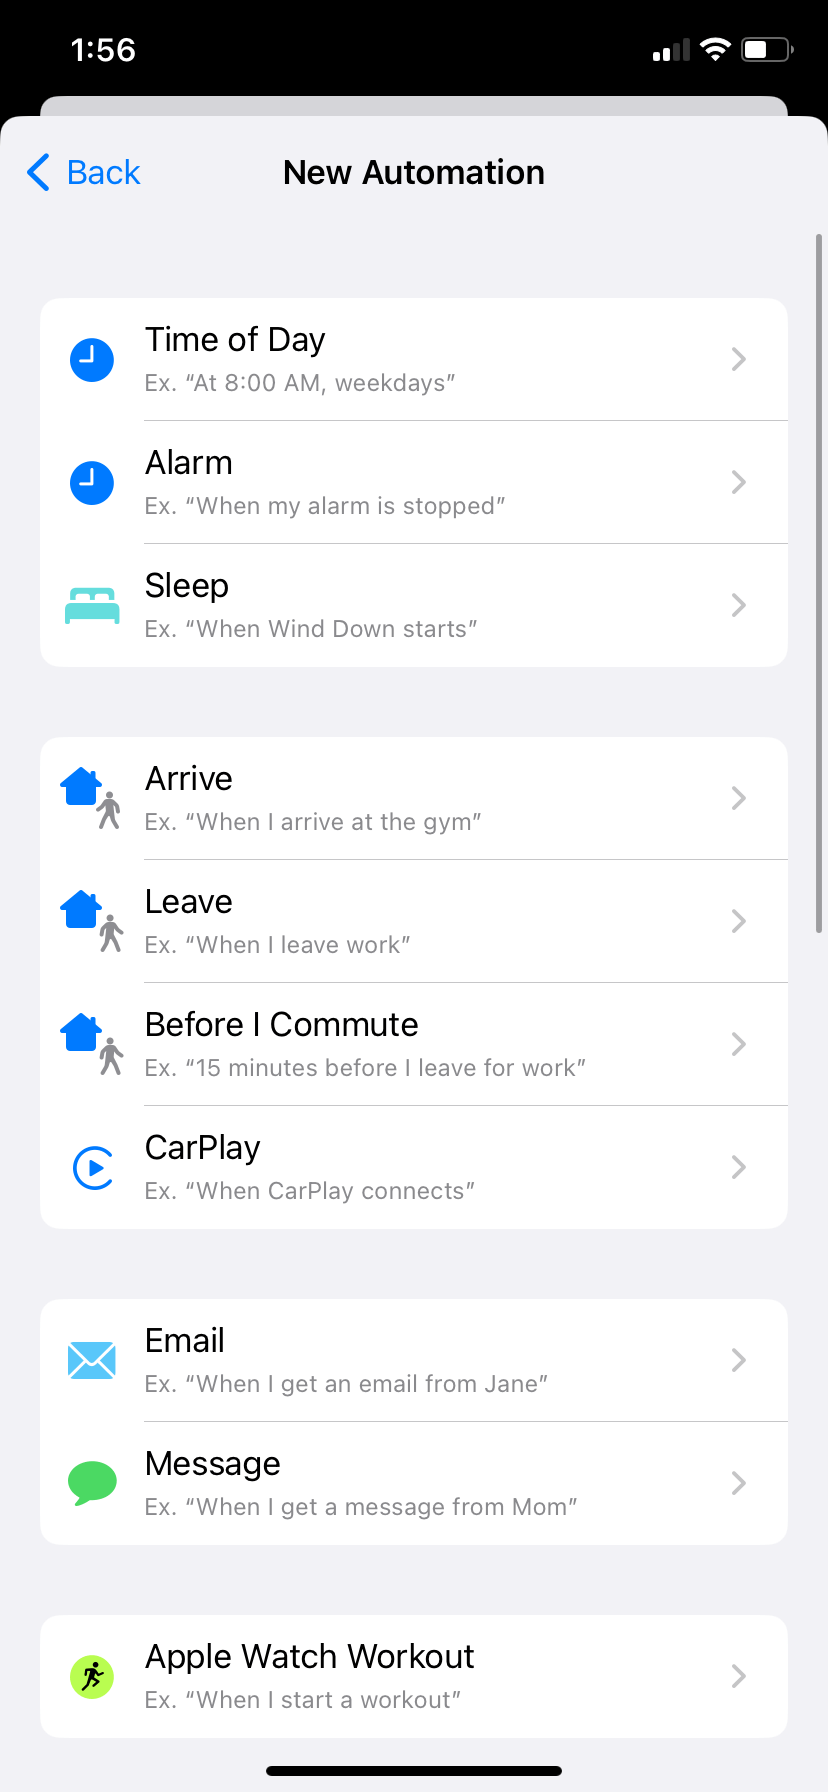 A “New Automation” menu listing ten trigger options including “Time of Day,” “Alarm,” and “Sleep.”